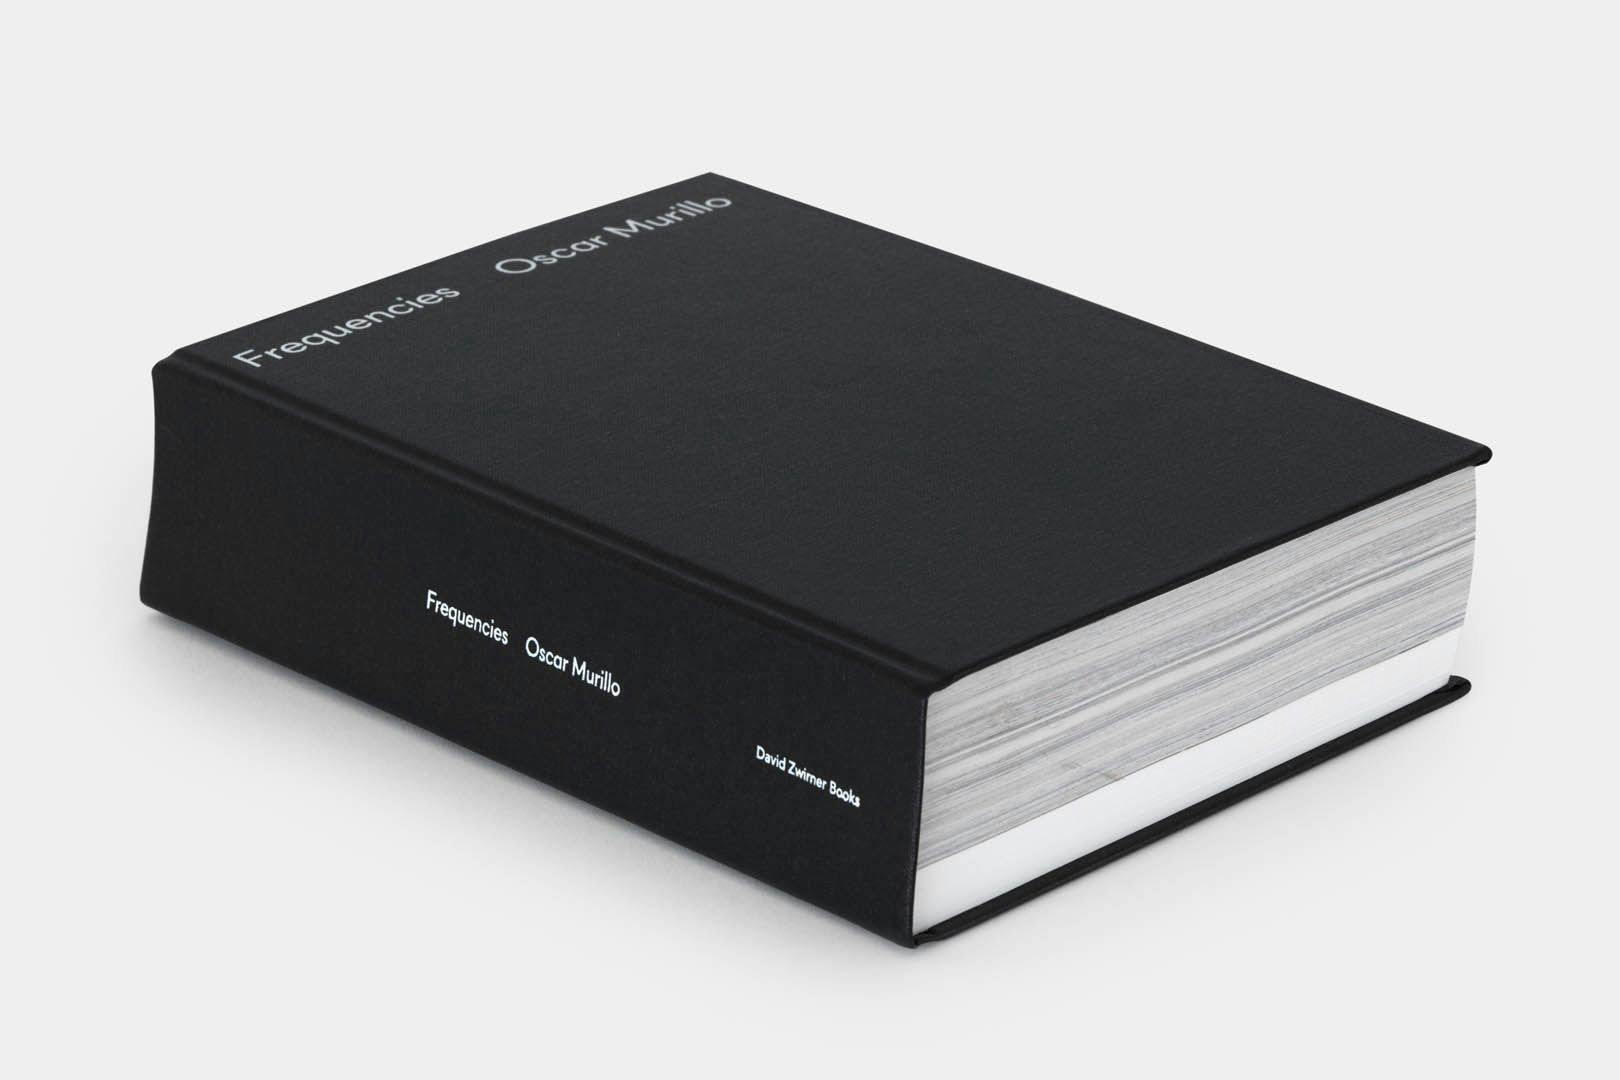 Front cover of a book titled Frequencies: Oscar Murillo, published by David Zwirner Books in 2015.